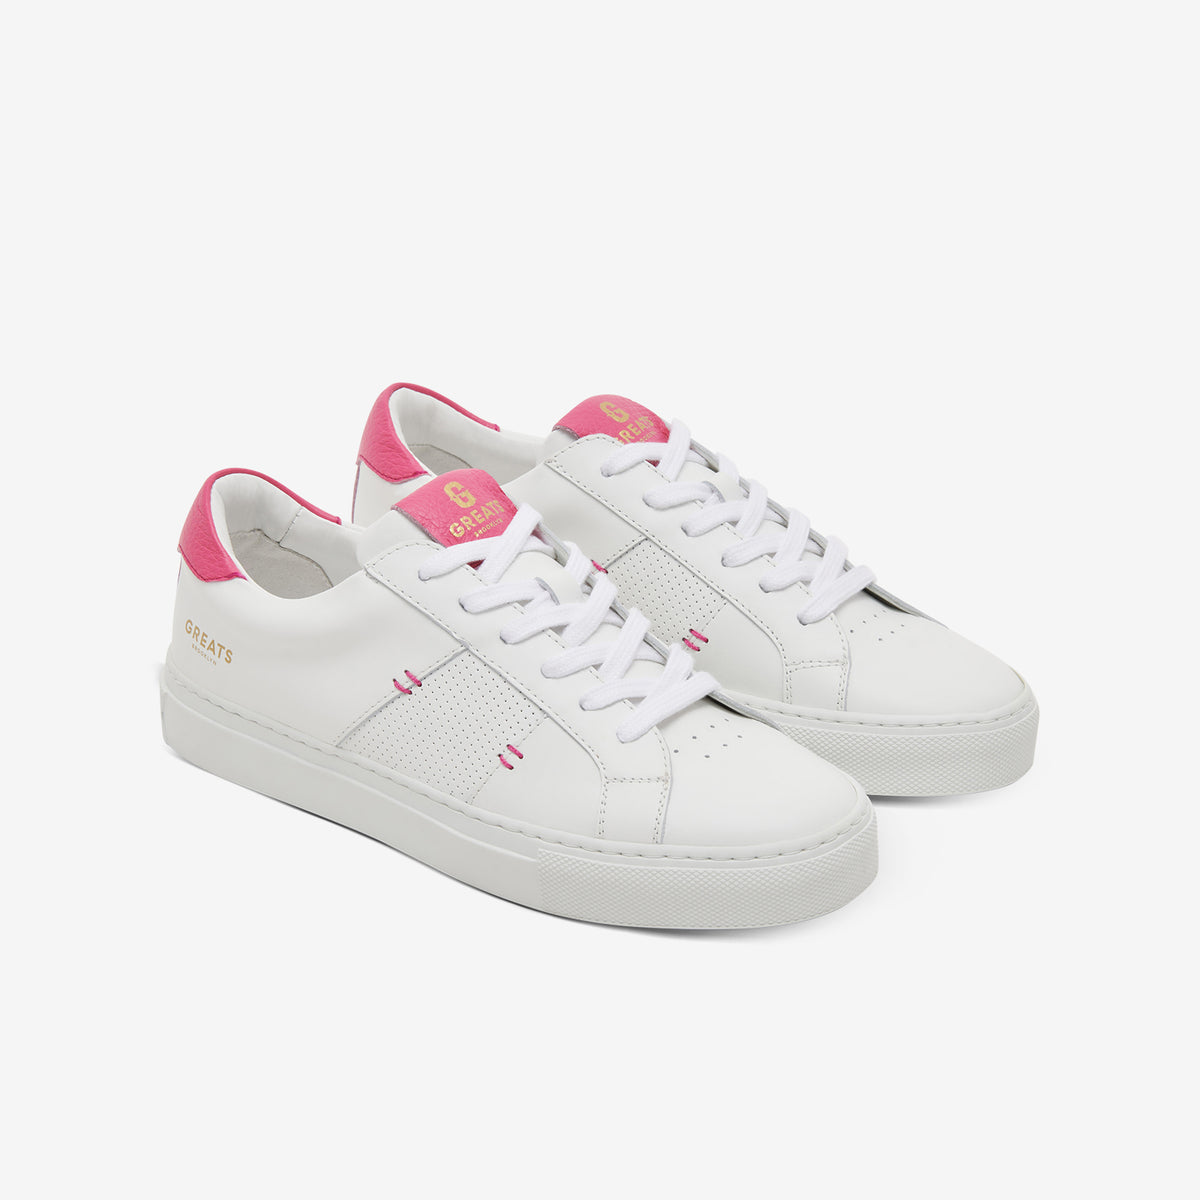 The Royale 2.0 - White/Neon Pink - Women's Shoe - GREATS